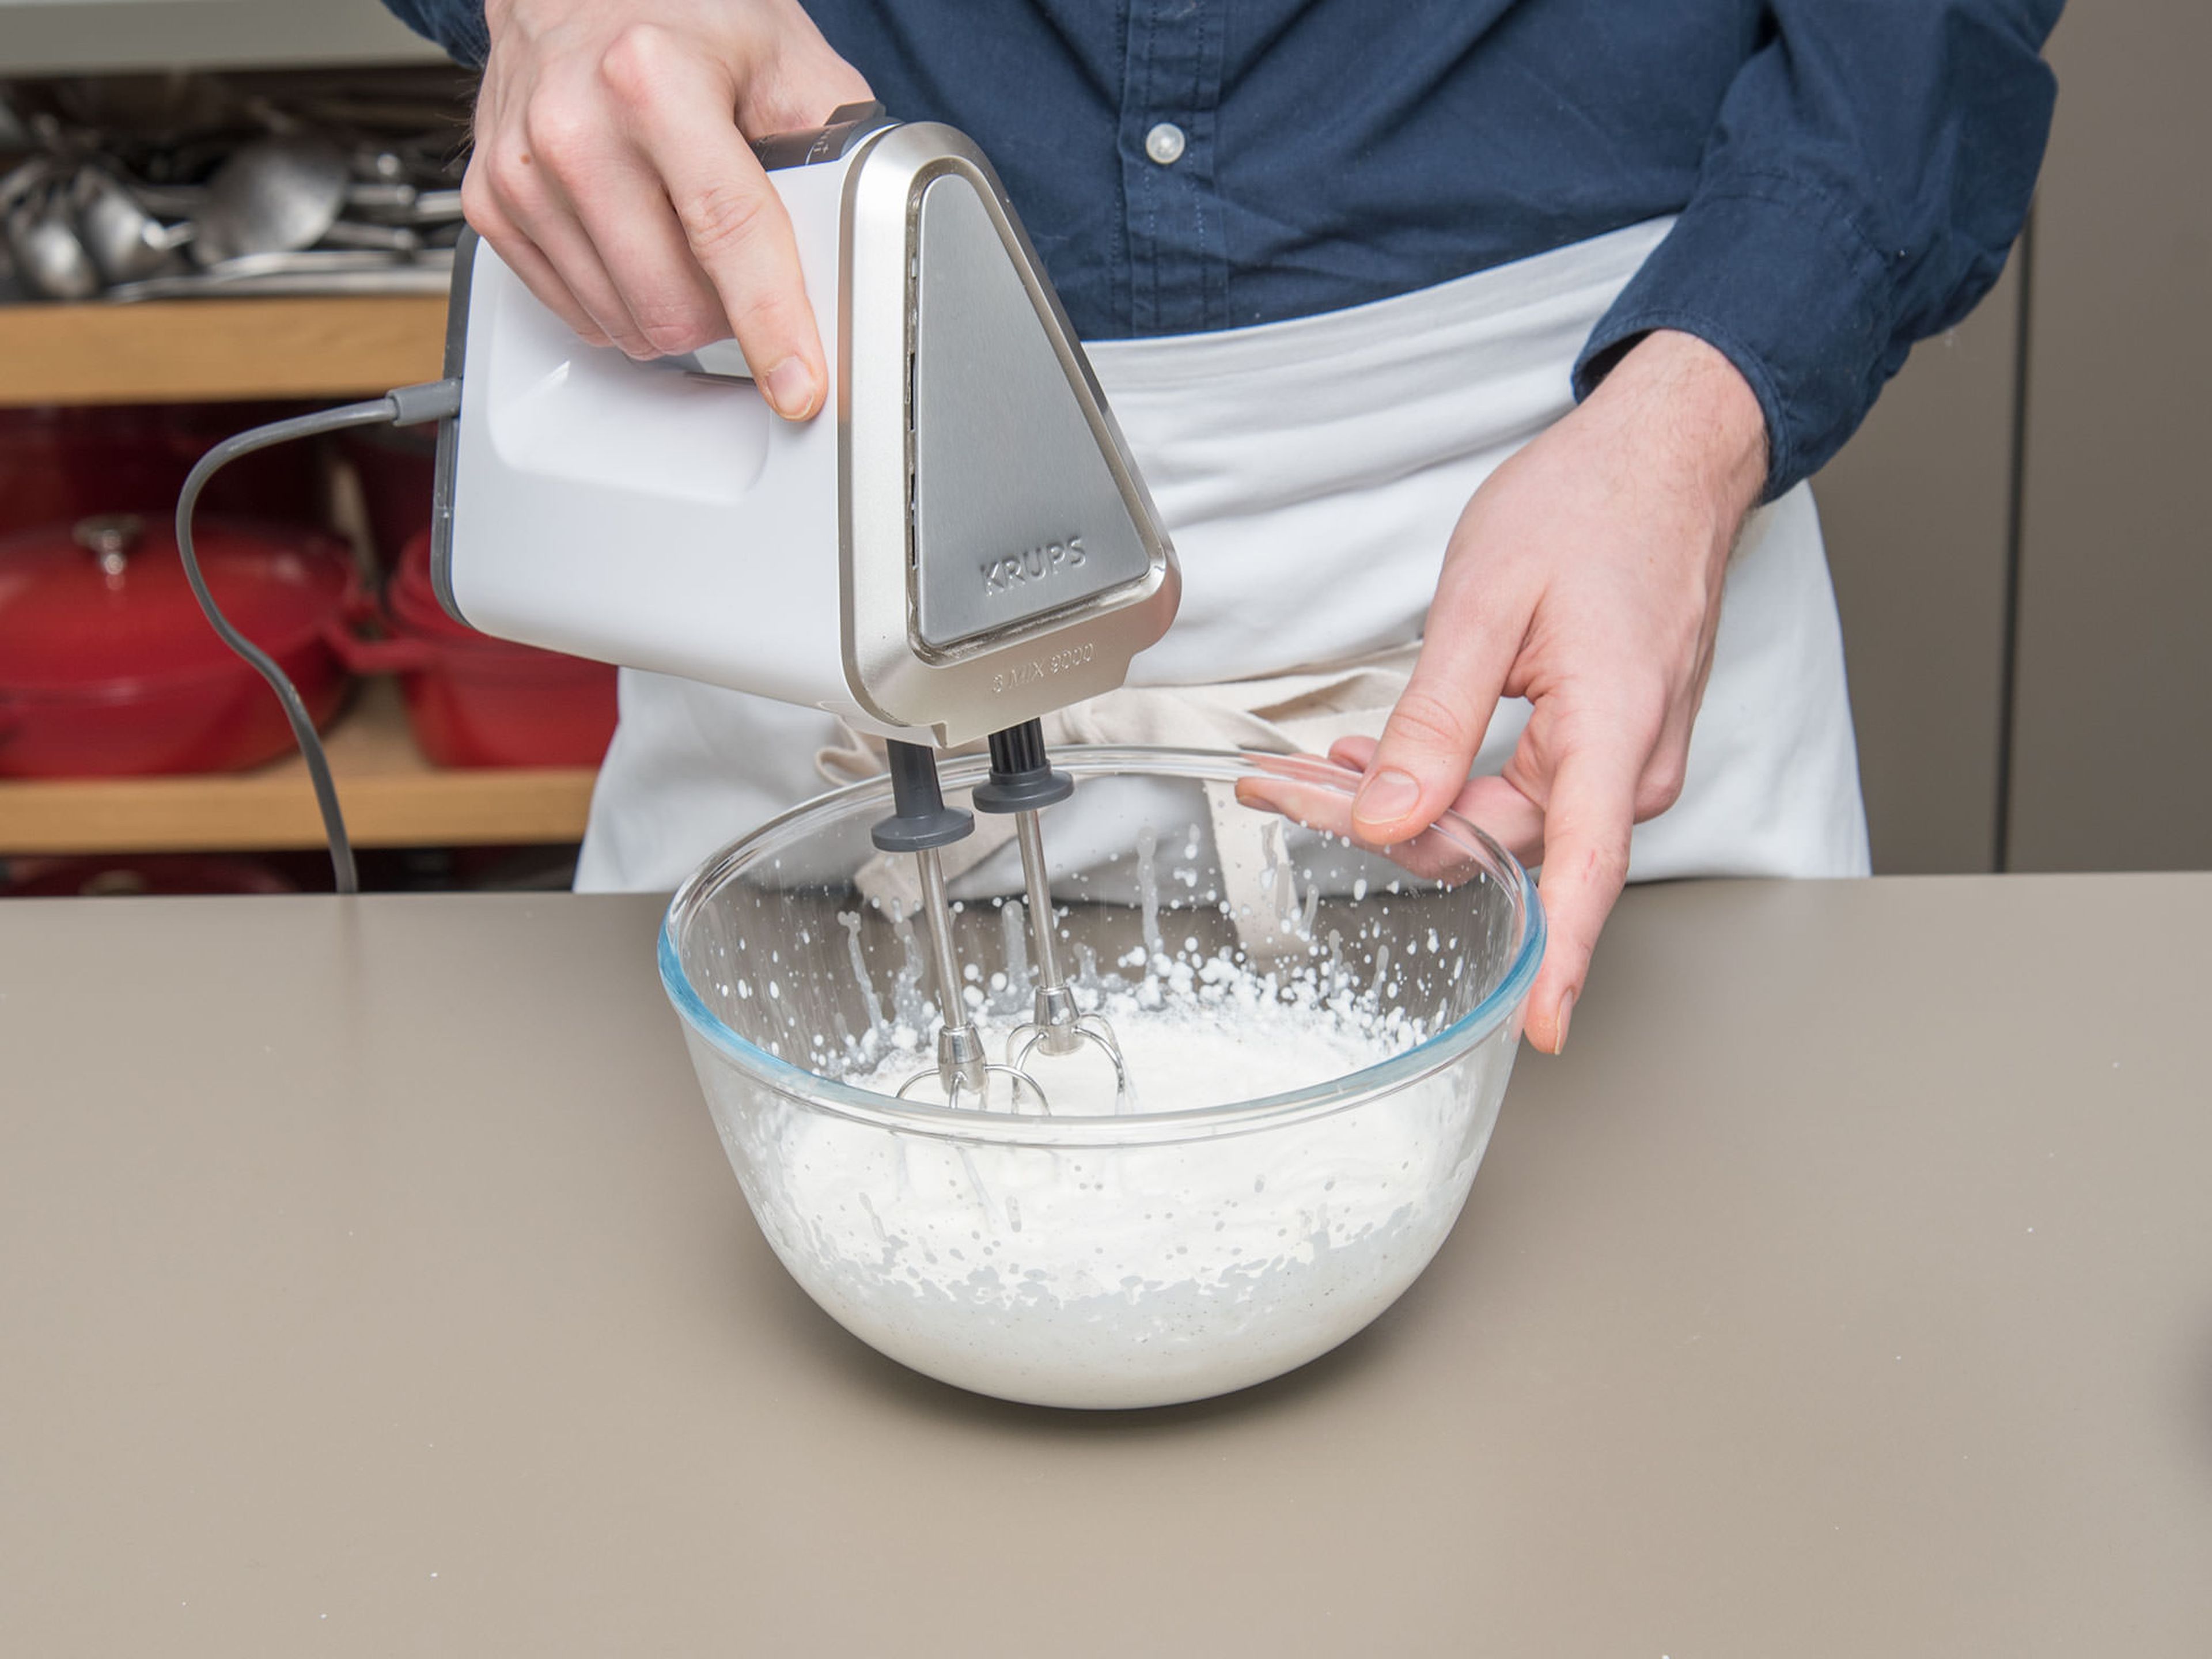 For the topping, mix heavy cream, confectioner’s sugar, and vanilla sugar and beat until foamy.